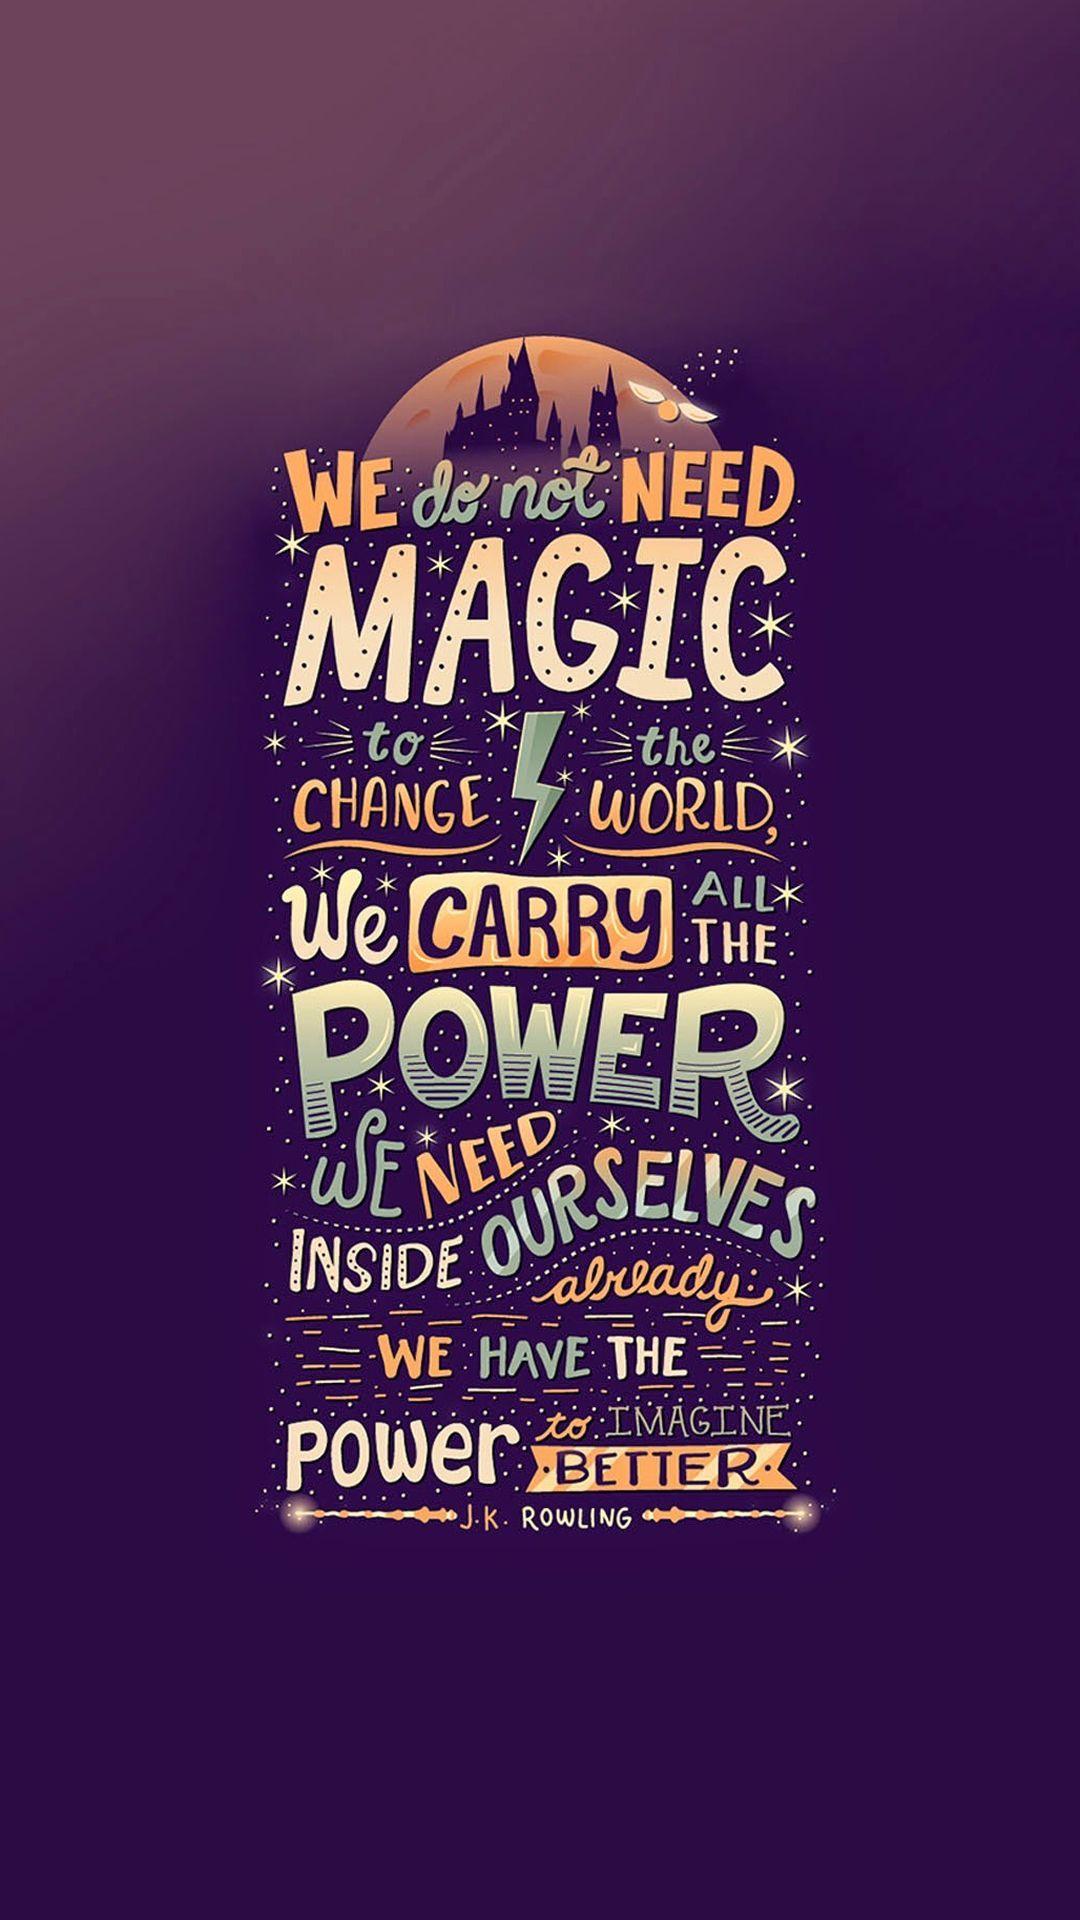 We have the power to imagine better.K. Rowling. Inspirational